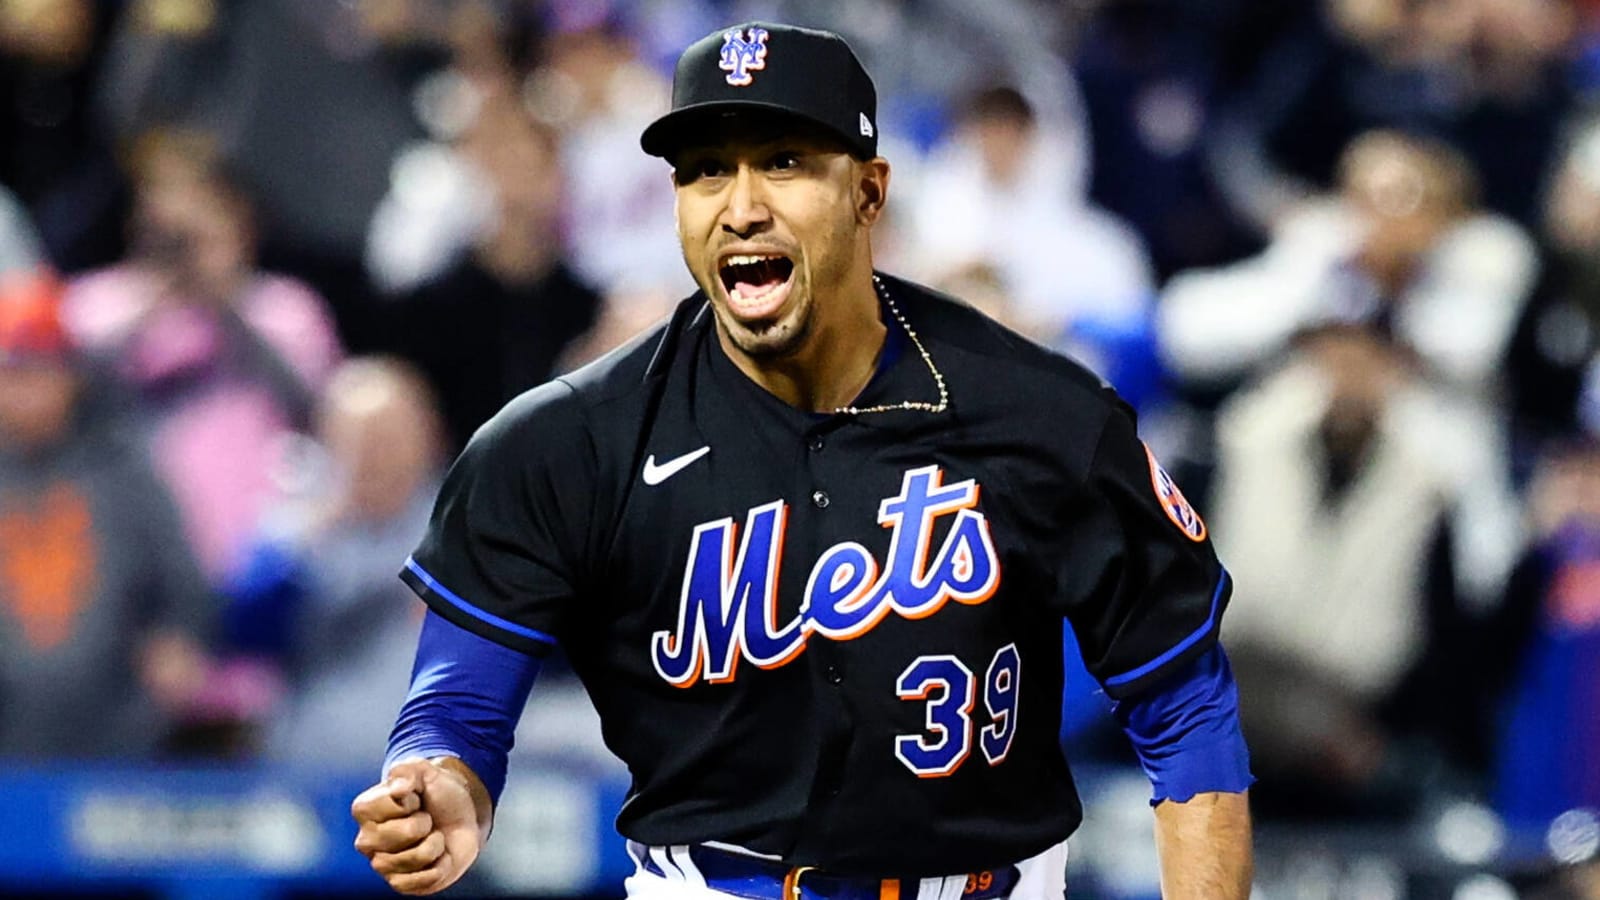 Edwin Diaz Continues to be Lights out for New York Mets - Sports